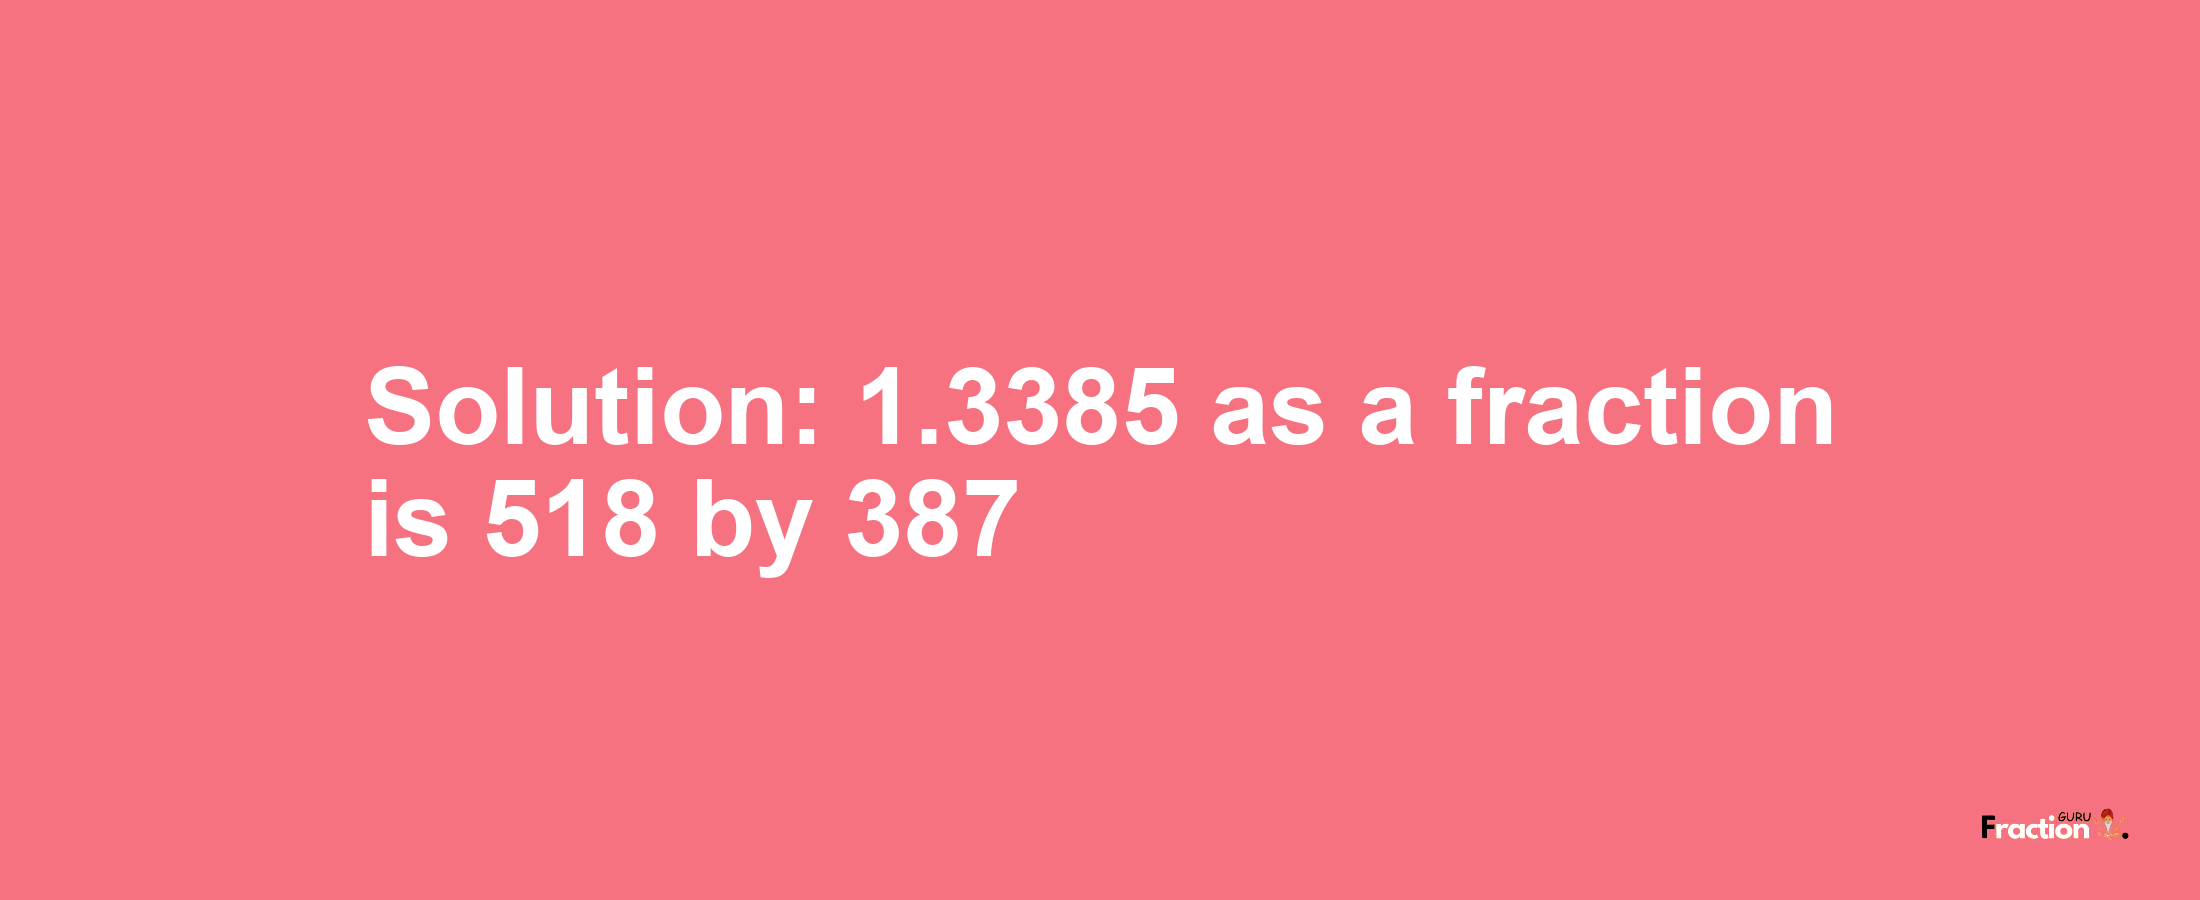 Solution:1.3385 as a fraction is 518/387